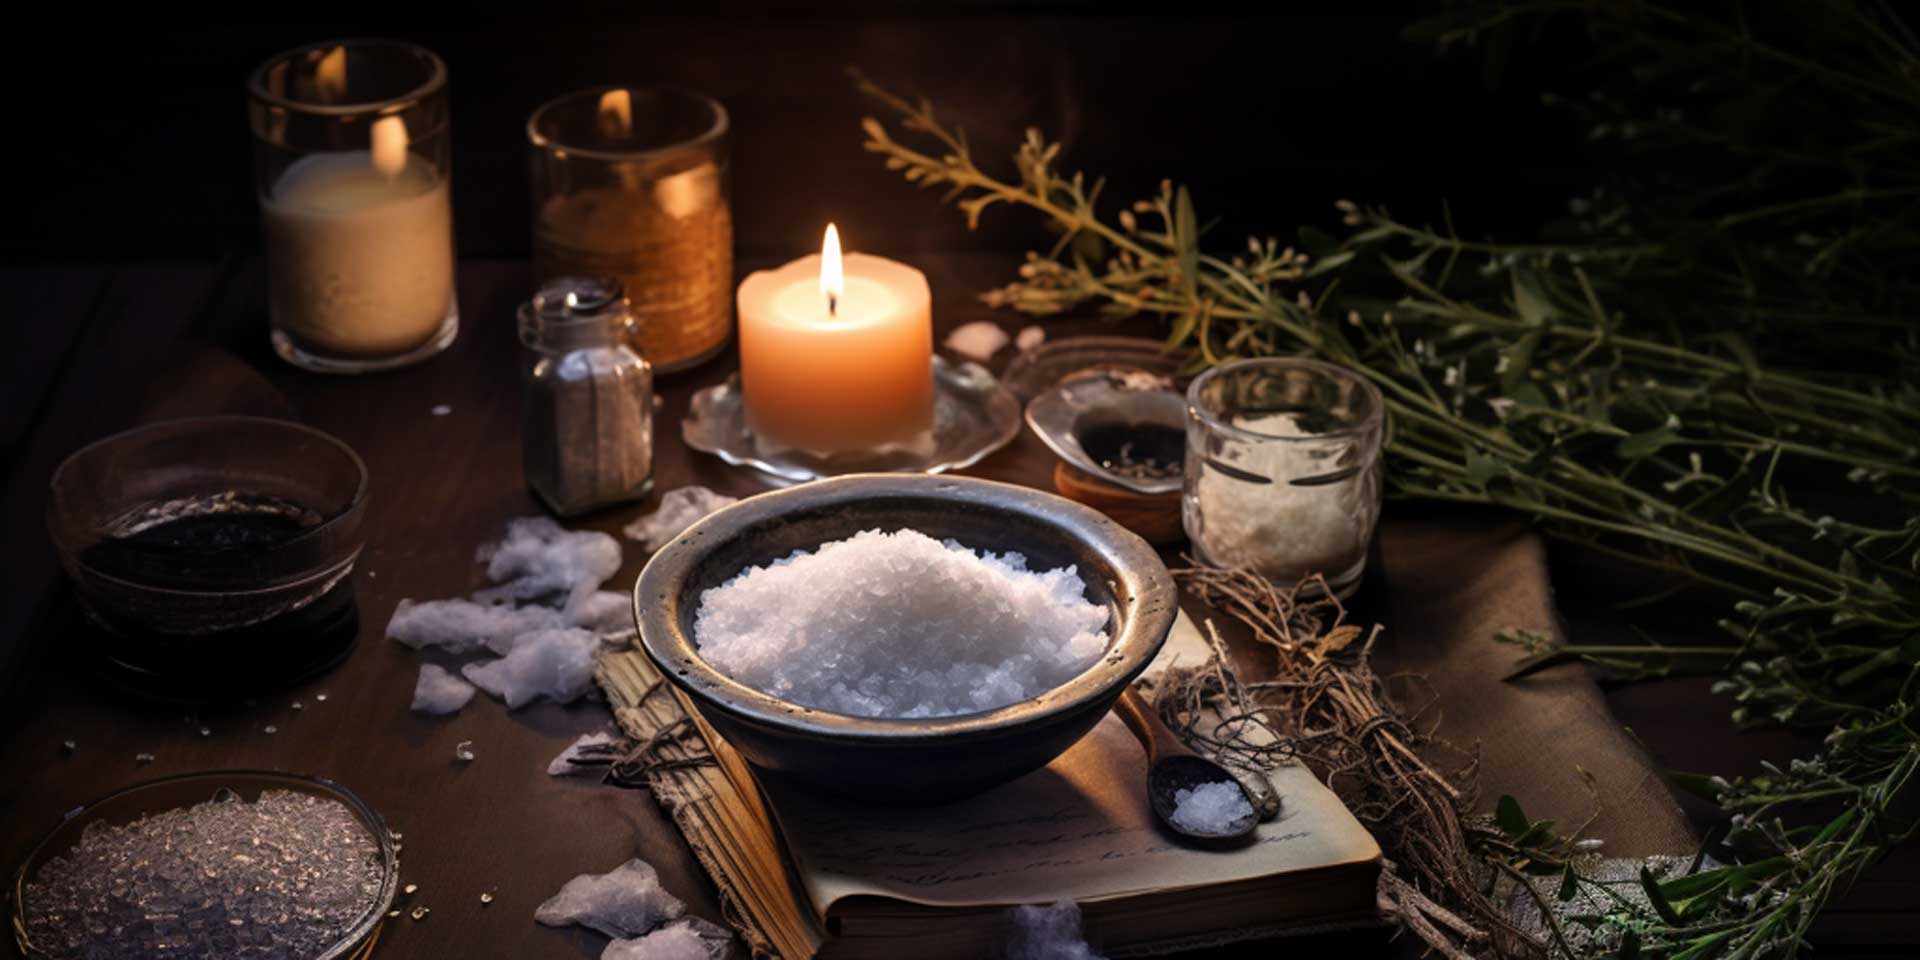 a spell for the virgo moon including a white candle and salt